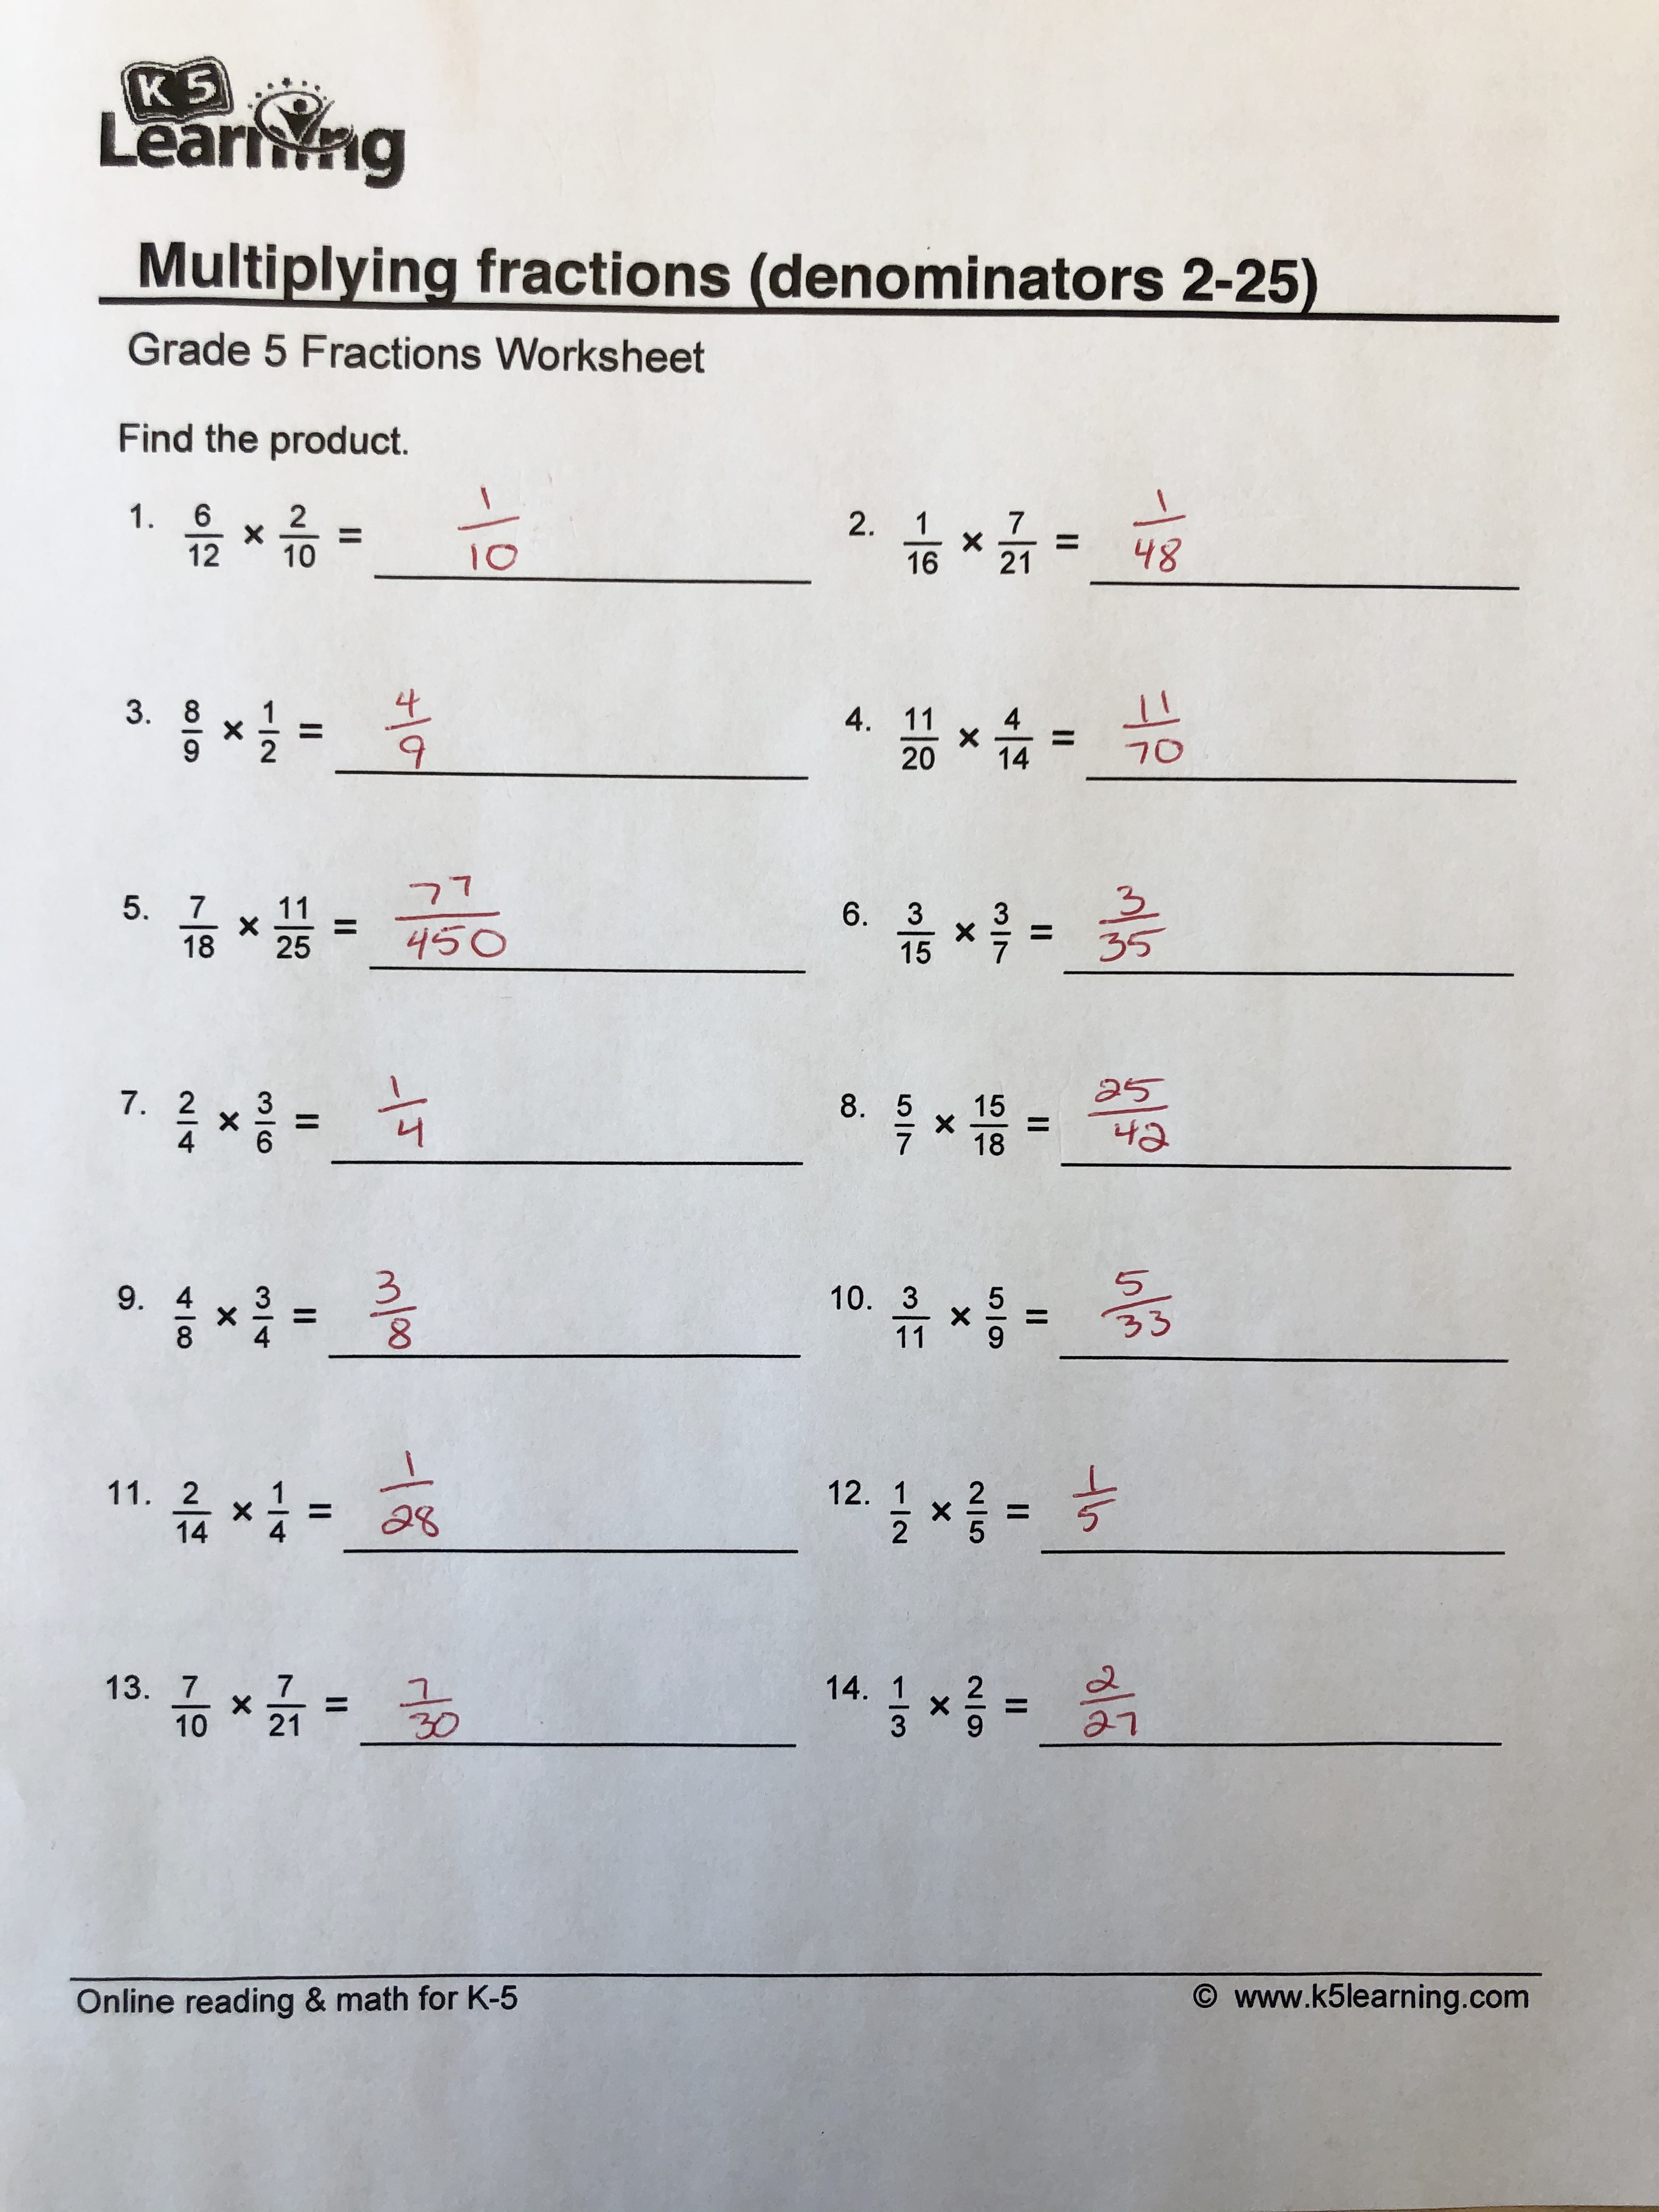 multiplication-fractions-worksheets-with-answers